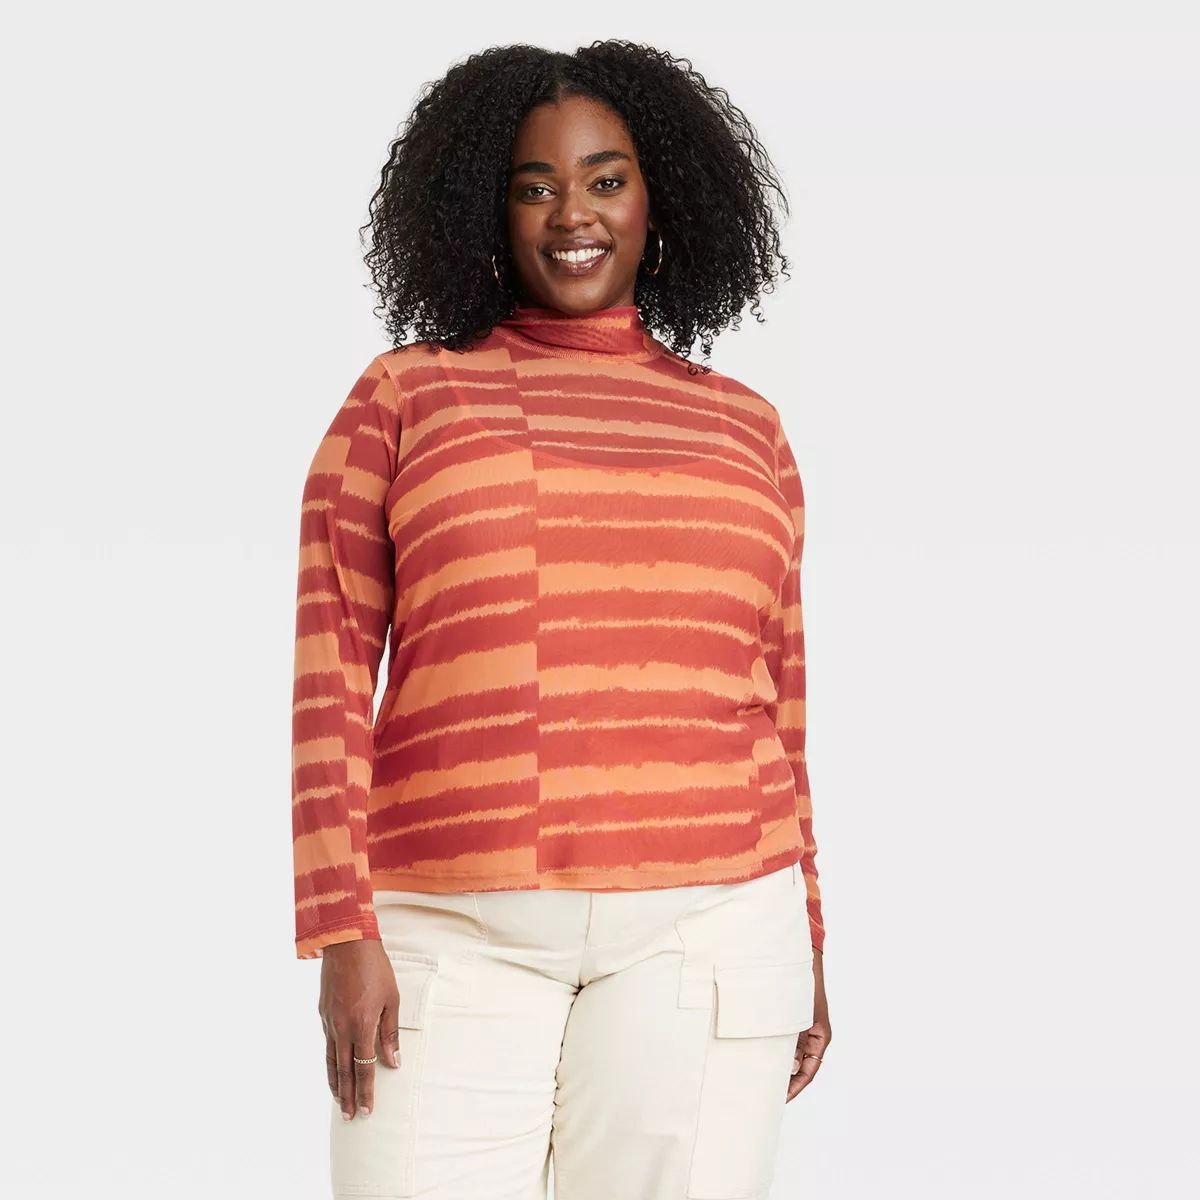 Black History Month Women's House of Aama Long Sleeve Turtleneck Jersey - Red Striped | Target